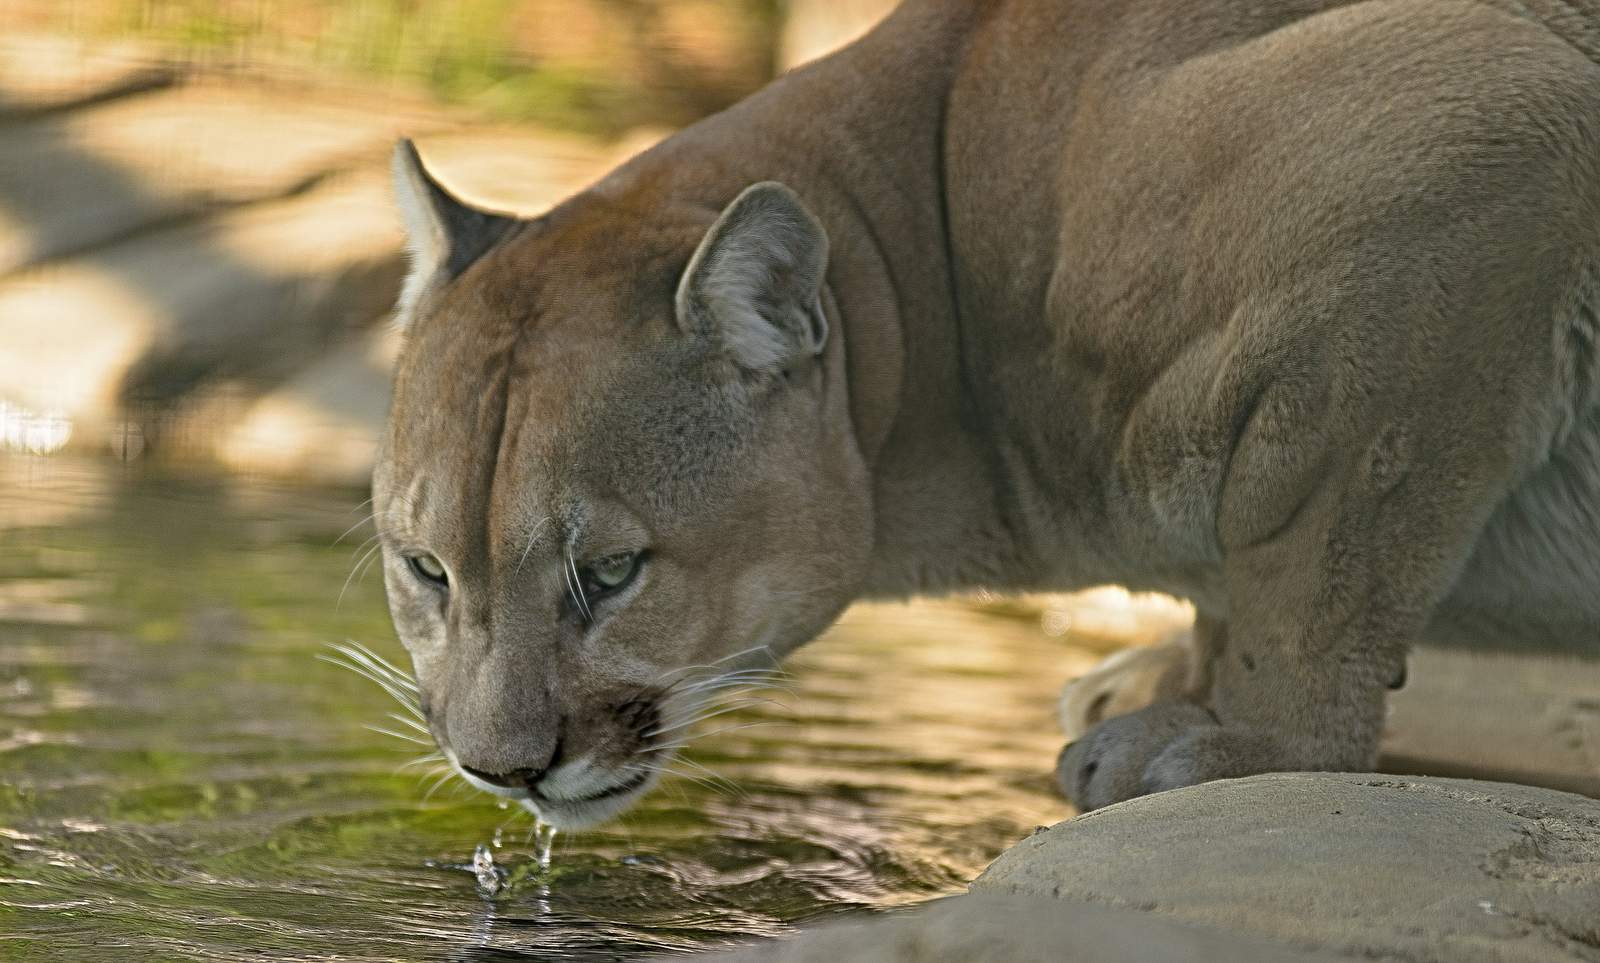 Cougar from a Texas wildlife organization tests positive for COVID-19